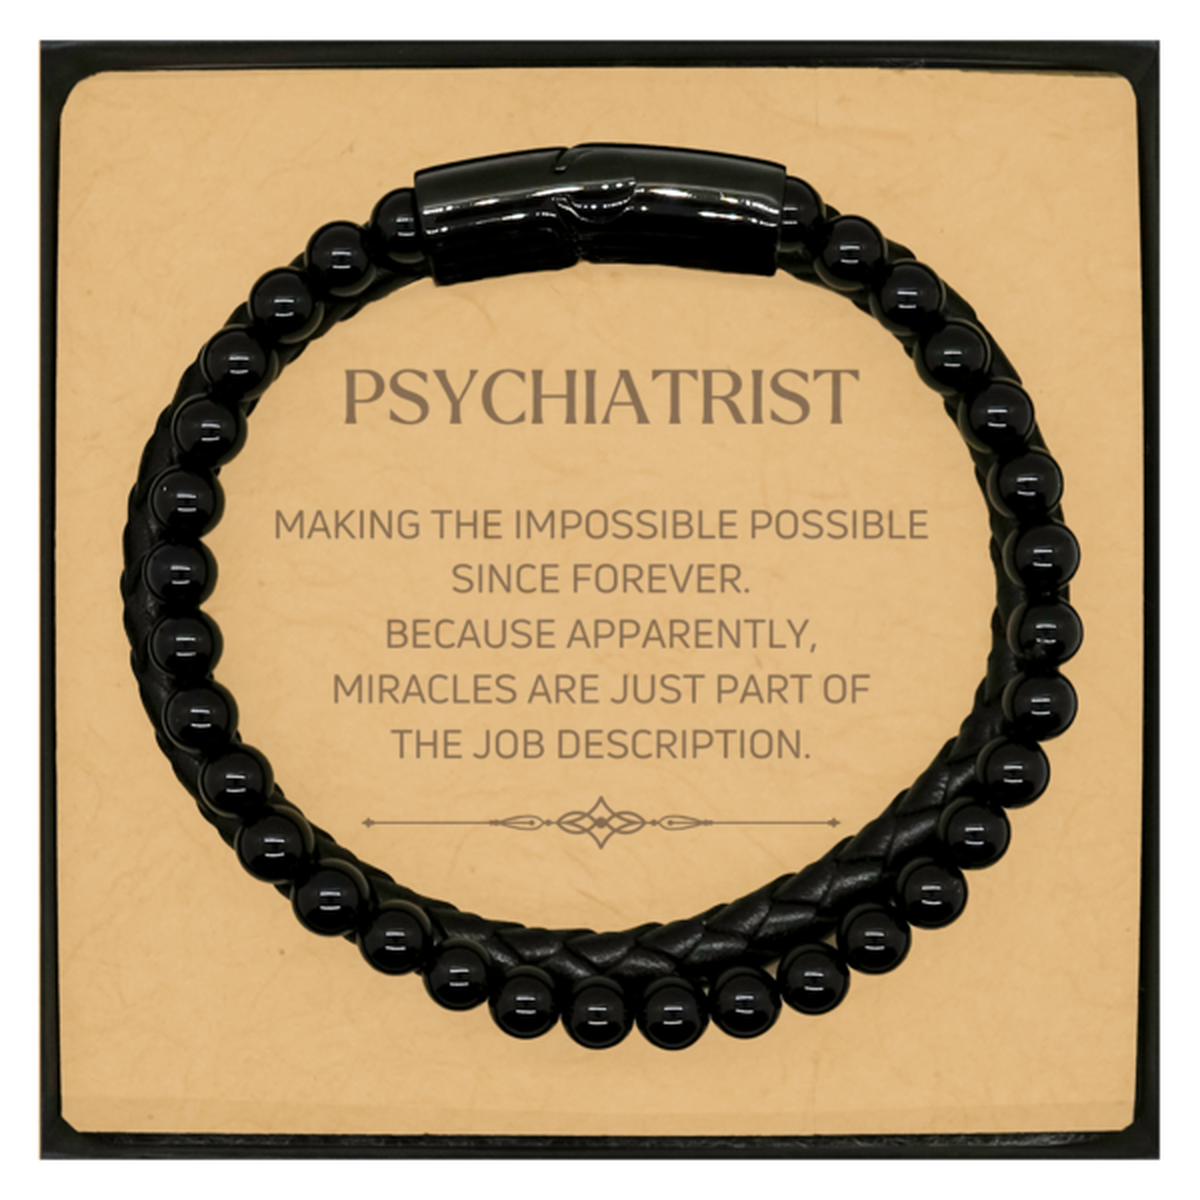 Funny Psychiatrist Gifts, Miracles are just part of the job description, Inspirational Birthday Christmas Stone Leather Bracelets For Psychiatrist, Men, Women, Coworkers, Friends, Boss